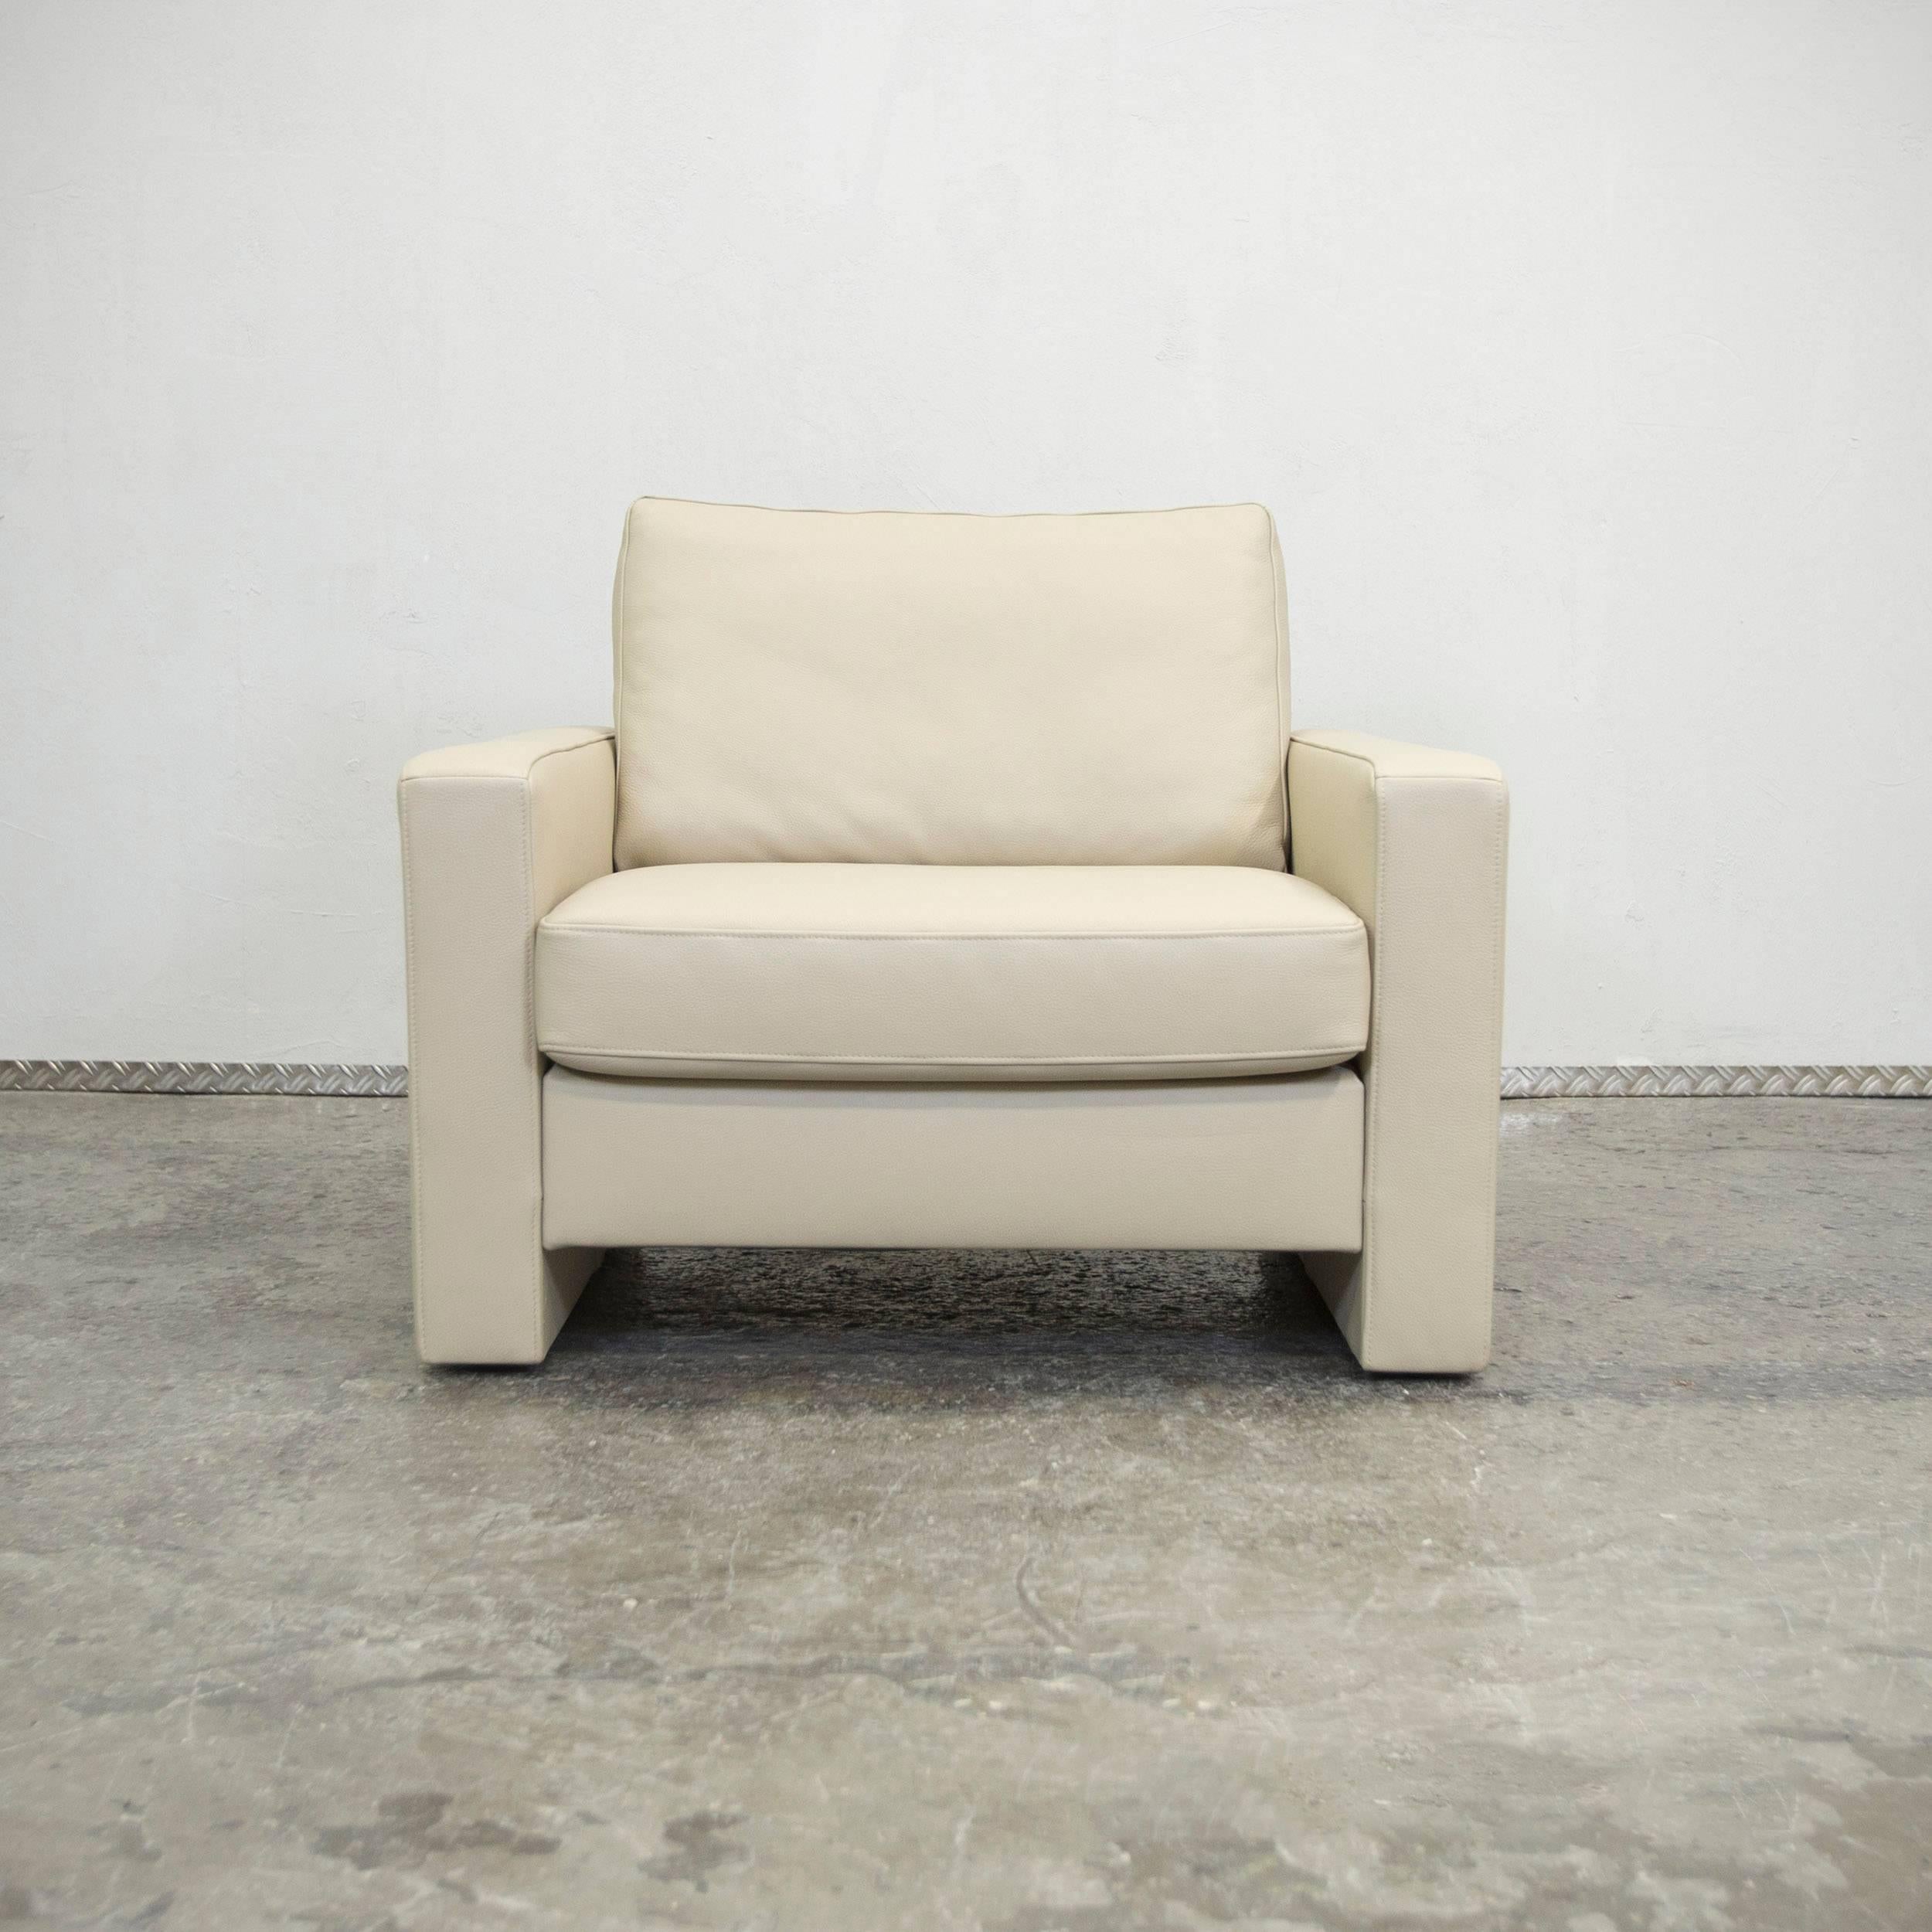 Beige colored original Ewald Schillig designer leather armchair in a minimalistic and modern design, made for pure comfort.